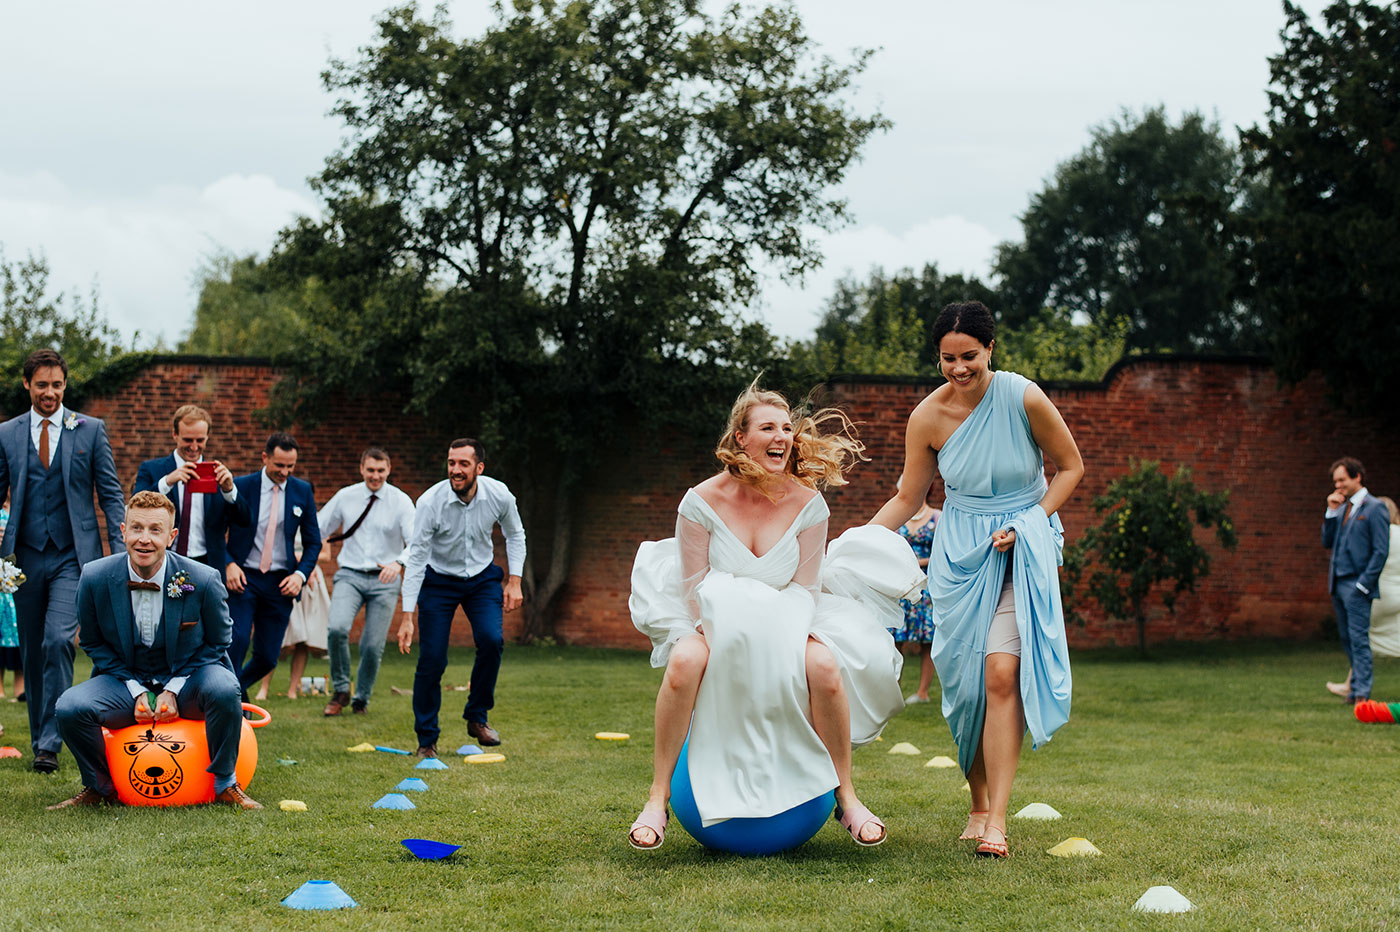 Space Hoppers at Wedding